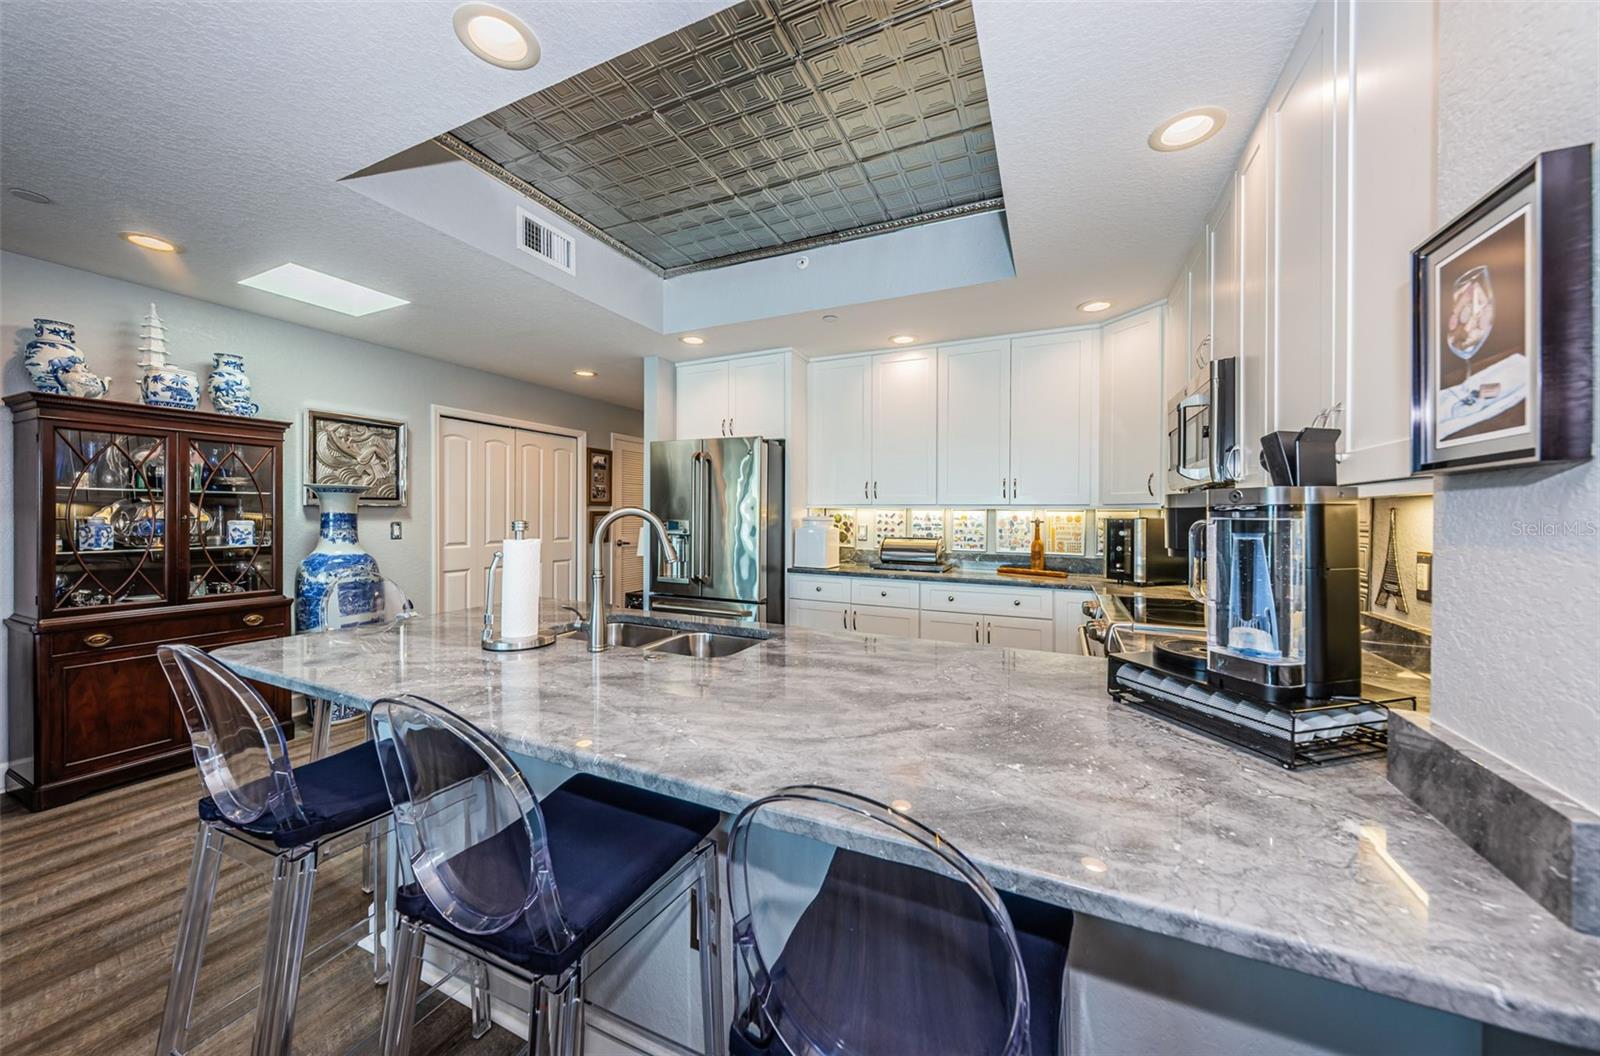 Casual Dining or Entertaining at the Breakfast Bar!